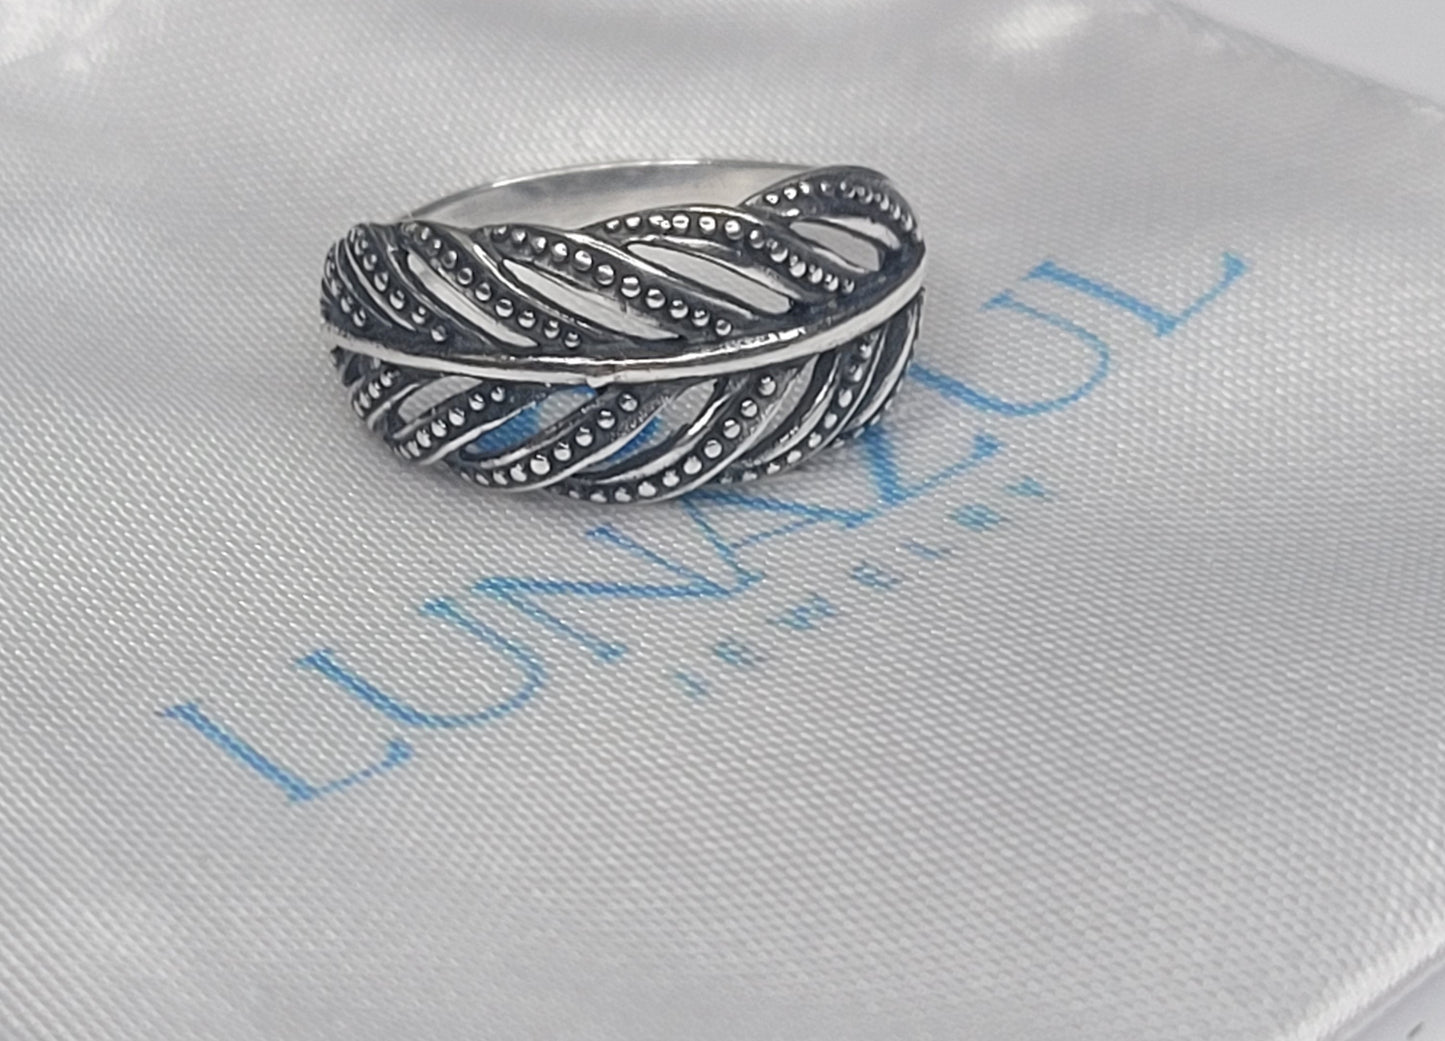 Sterling Silver Helecho Ring